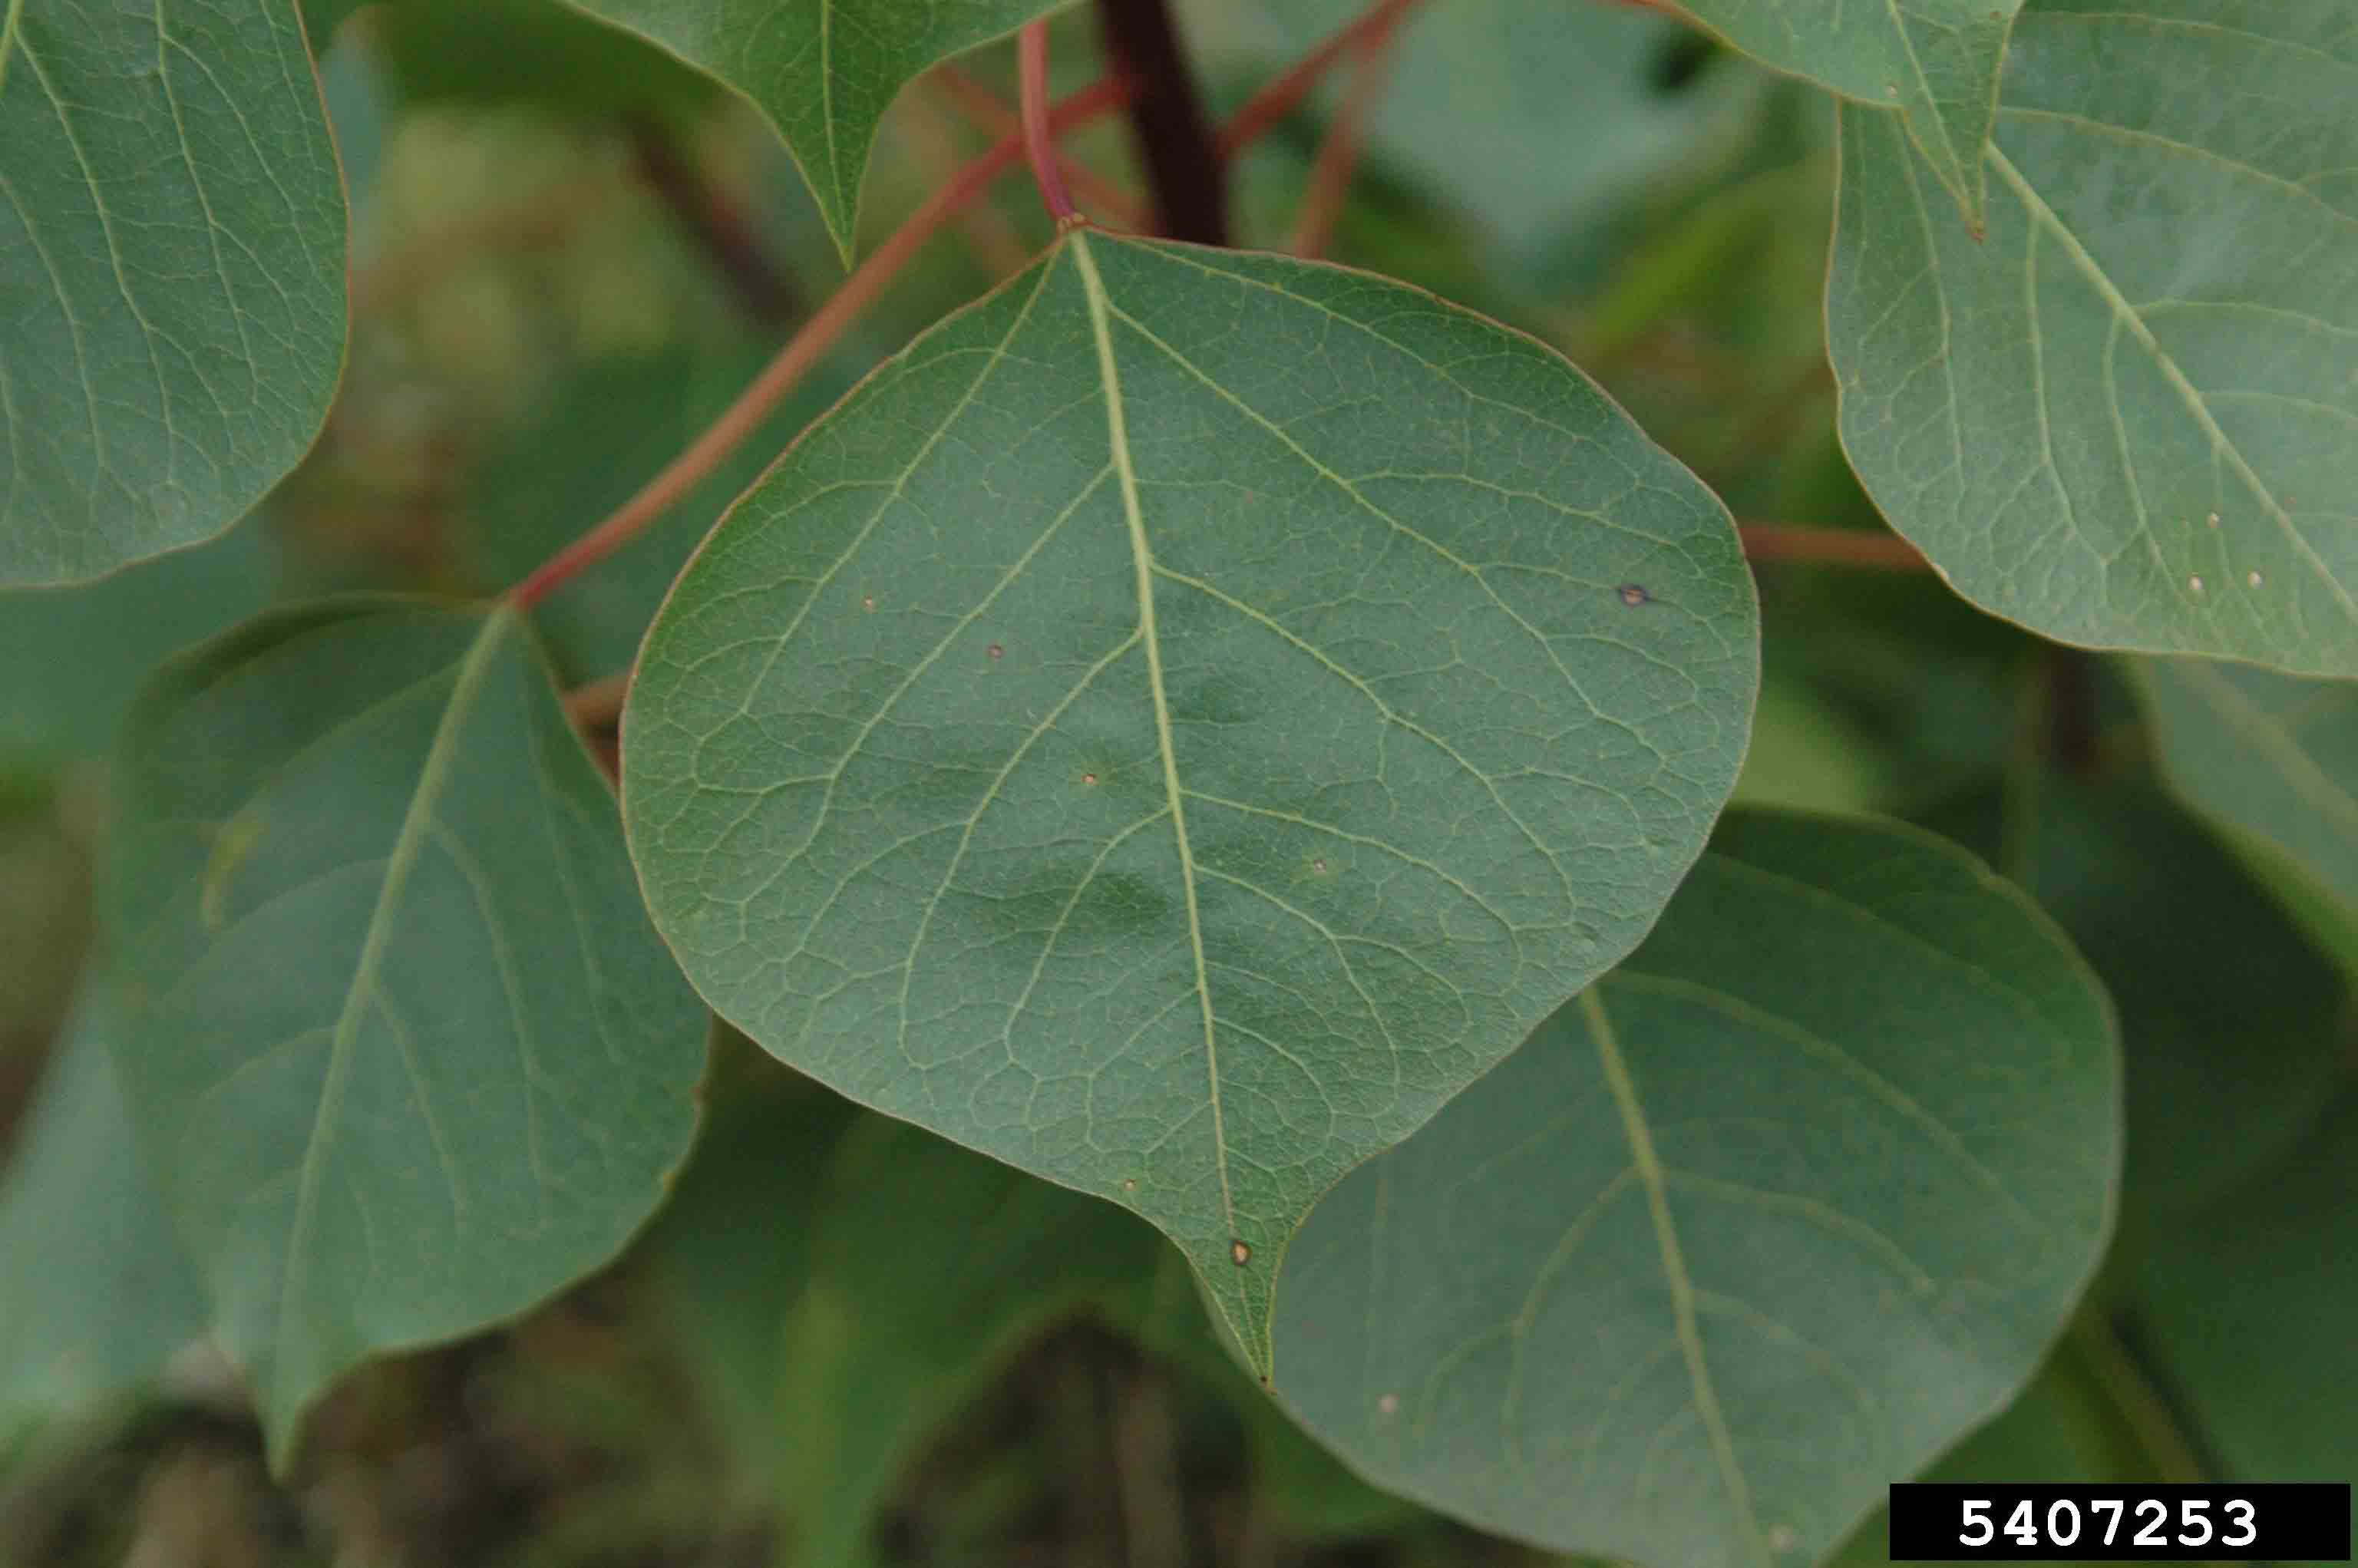 Chinese tallowtree leaf, with rounded diamond shape and smooth margins